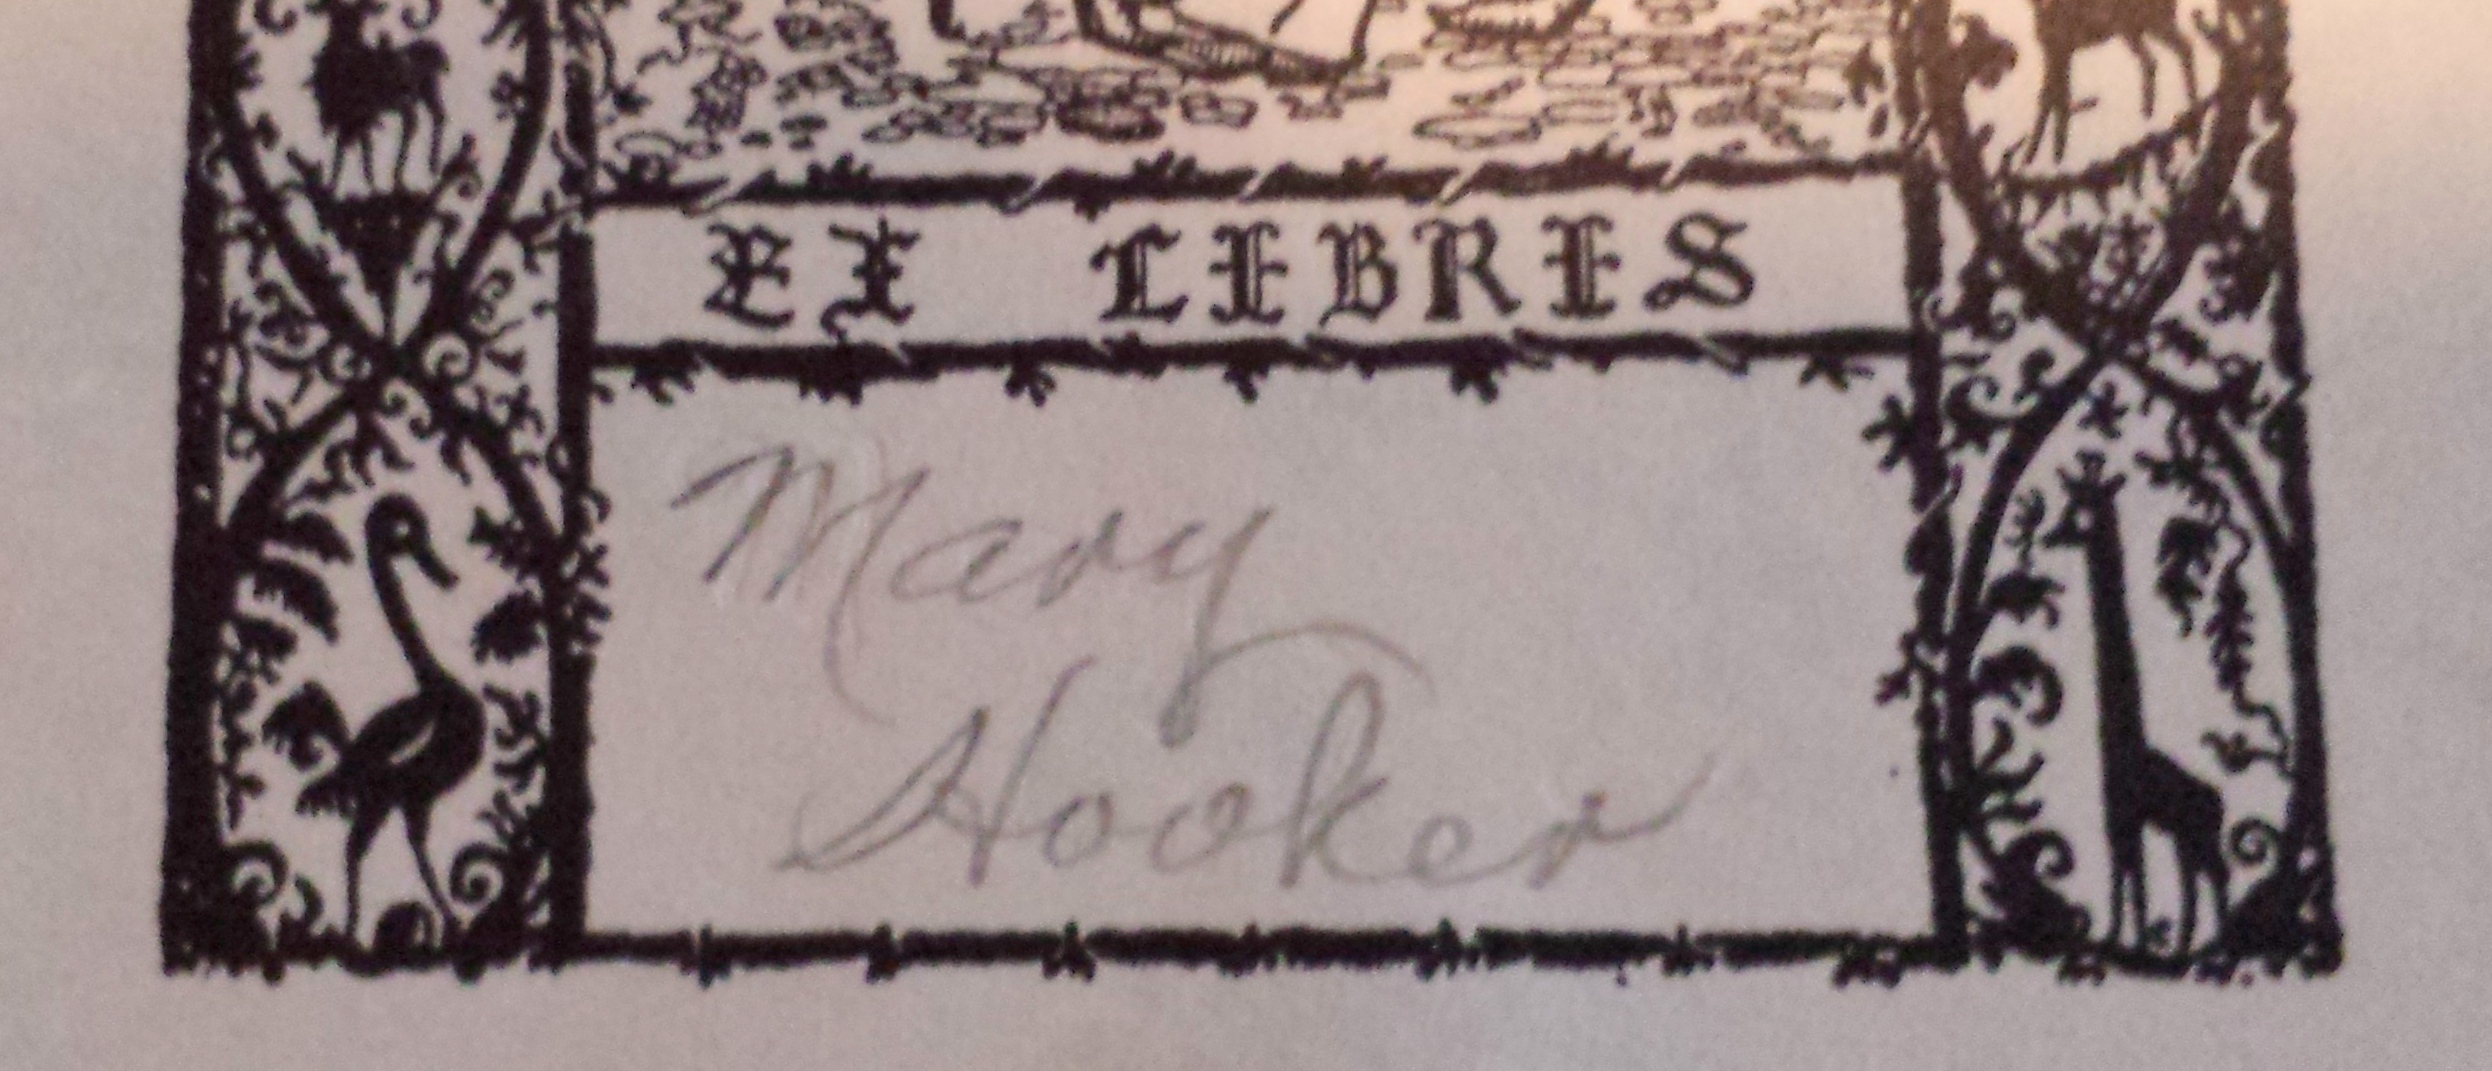 My mother's Ex Libris sticker from her copy of A Wonderful Year